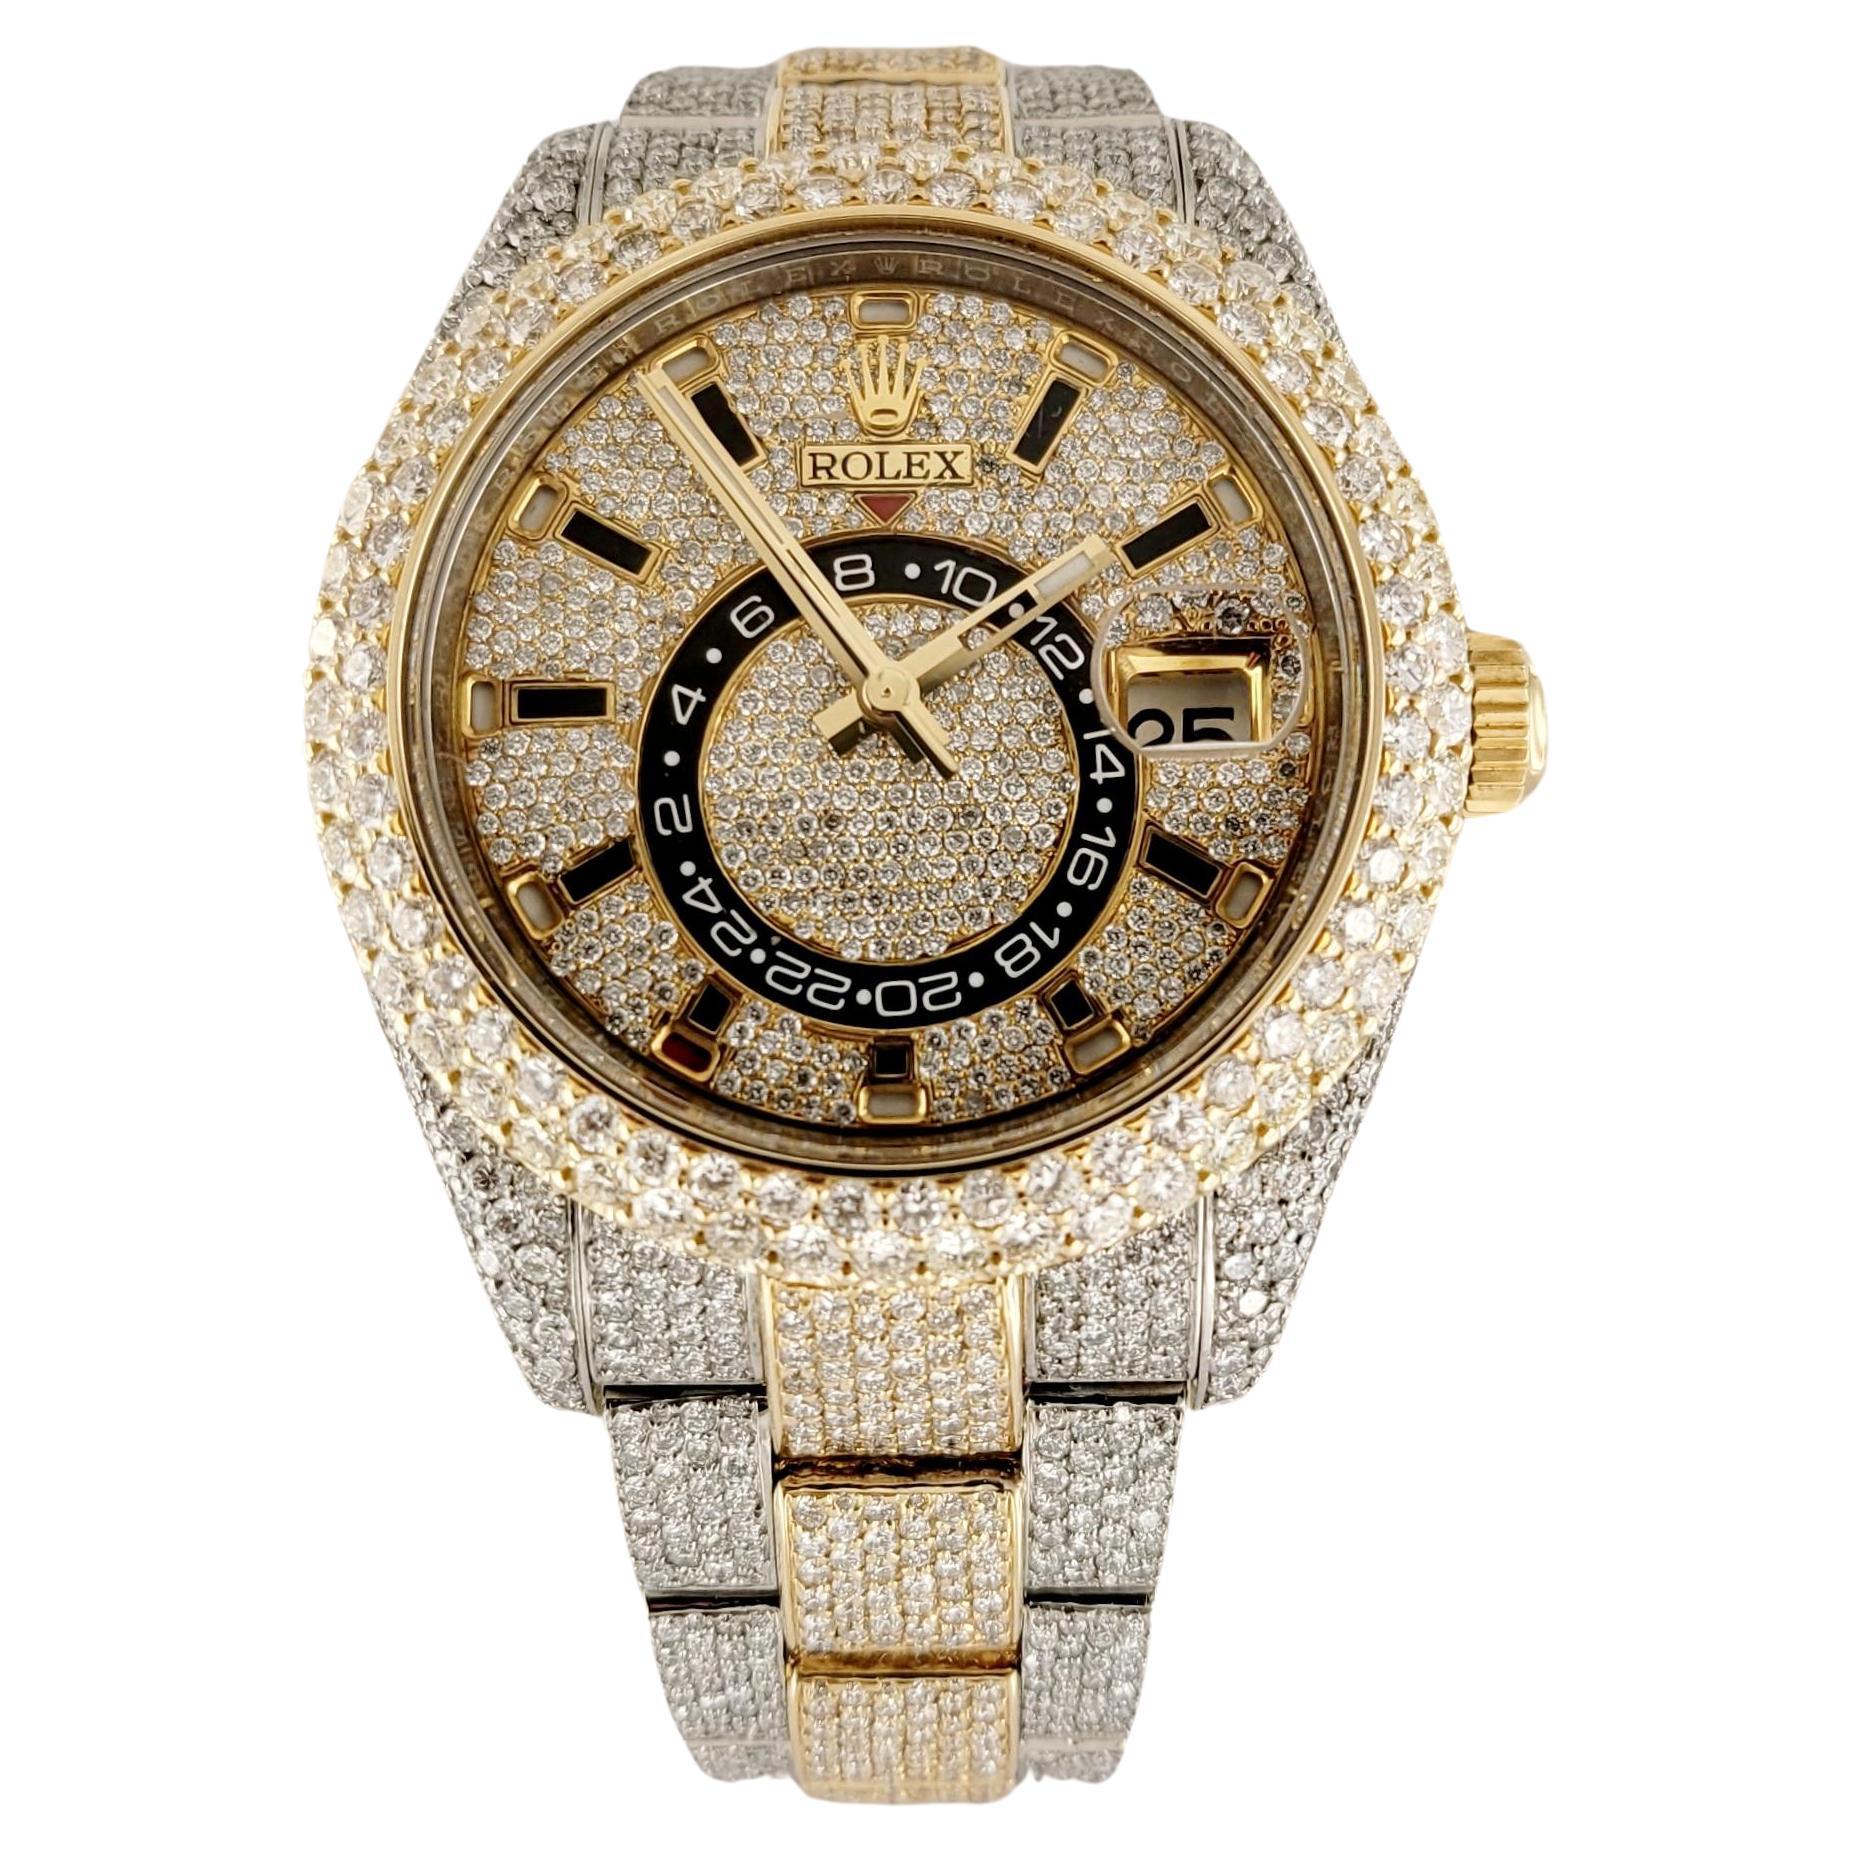 Brand Rolex 
Model Sky-Dweller
Two-Tone & Diamonds 
Movement Automatic 
Case Material Stainless Steel & Yellow Gold
Case Size 42mm
Band Material Stainless Steel & Yellow Gold
Diamonds 38.00 ctw
Diamond Clarity VS
Color Grade F
Condition Mint
Comes